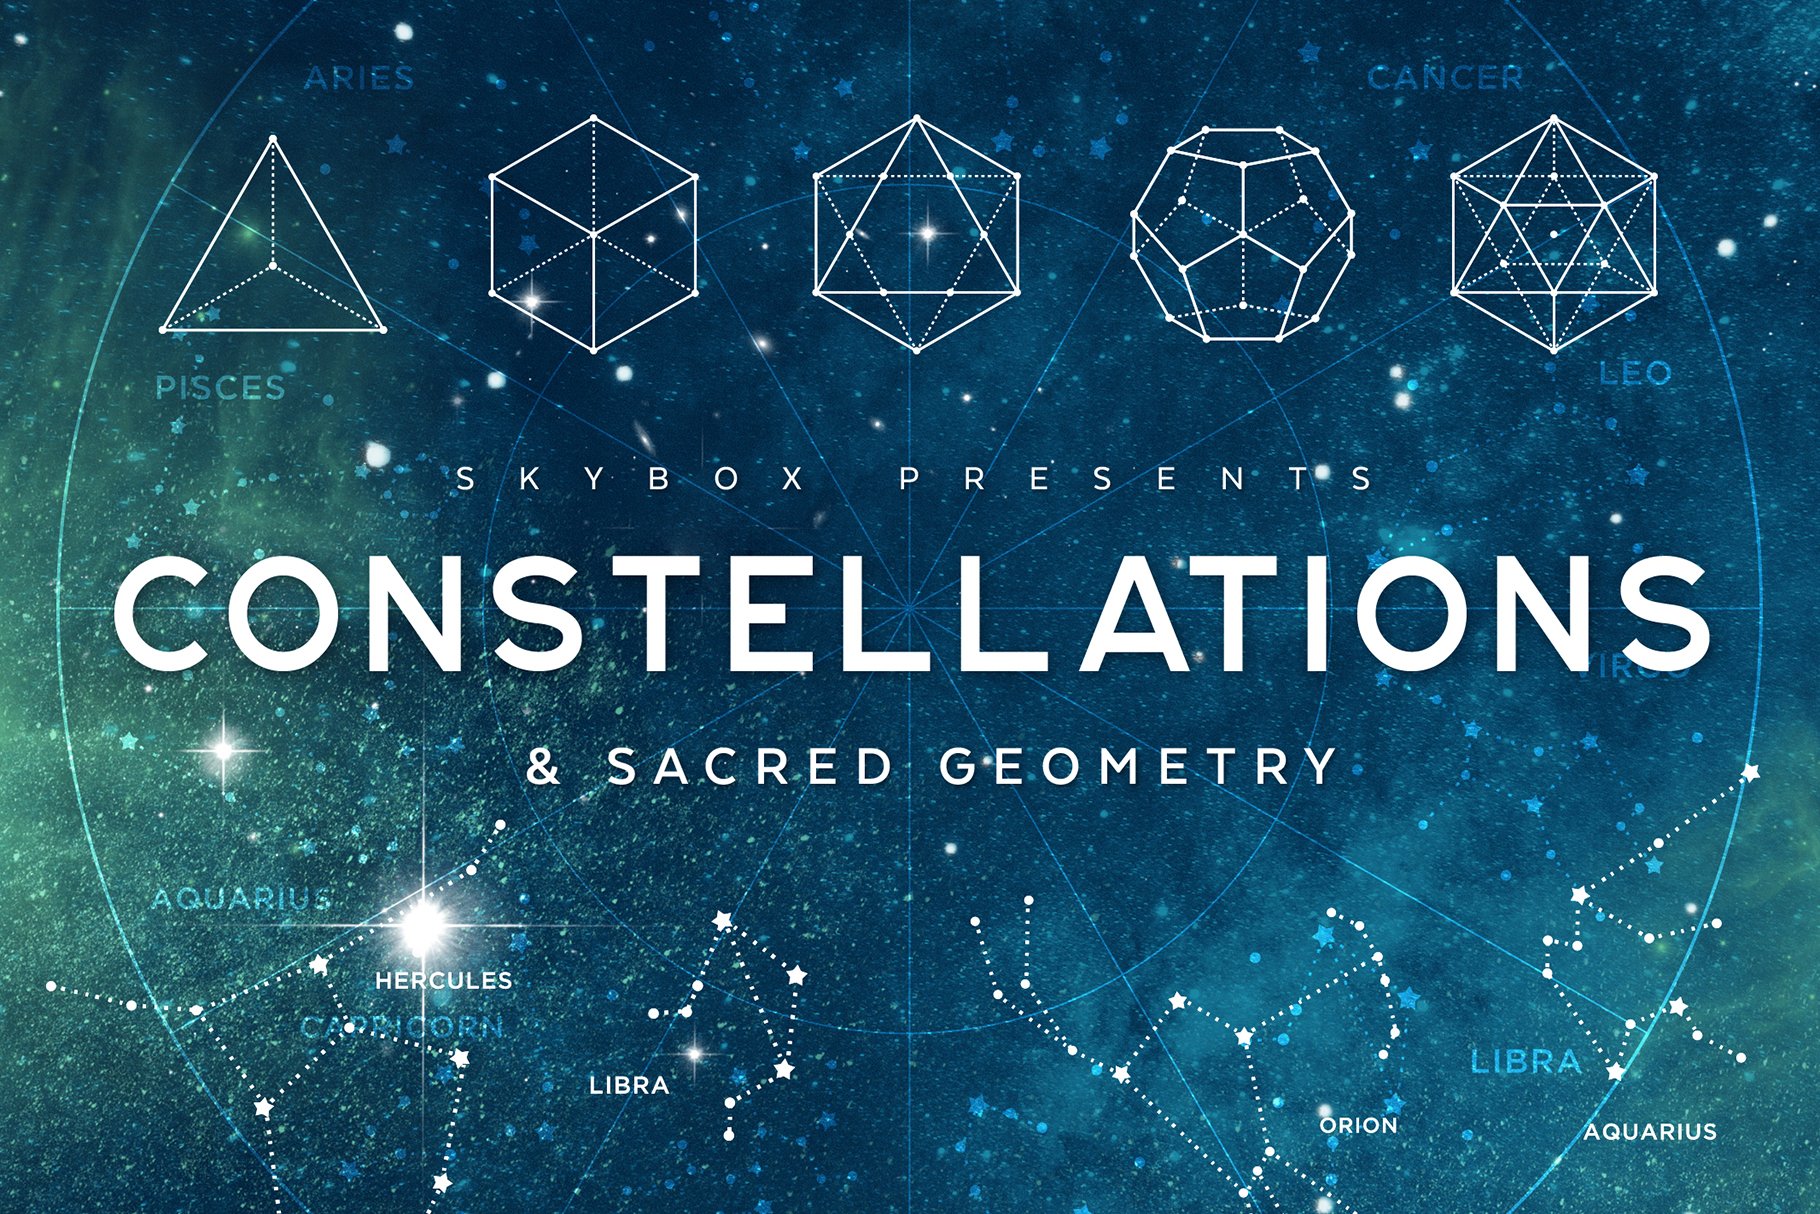 Constellations & Saced Geometry